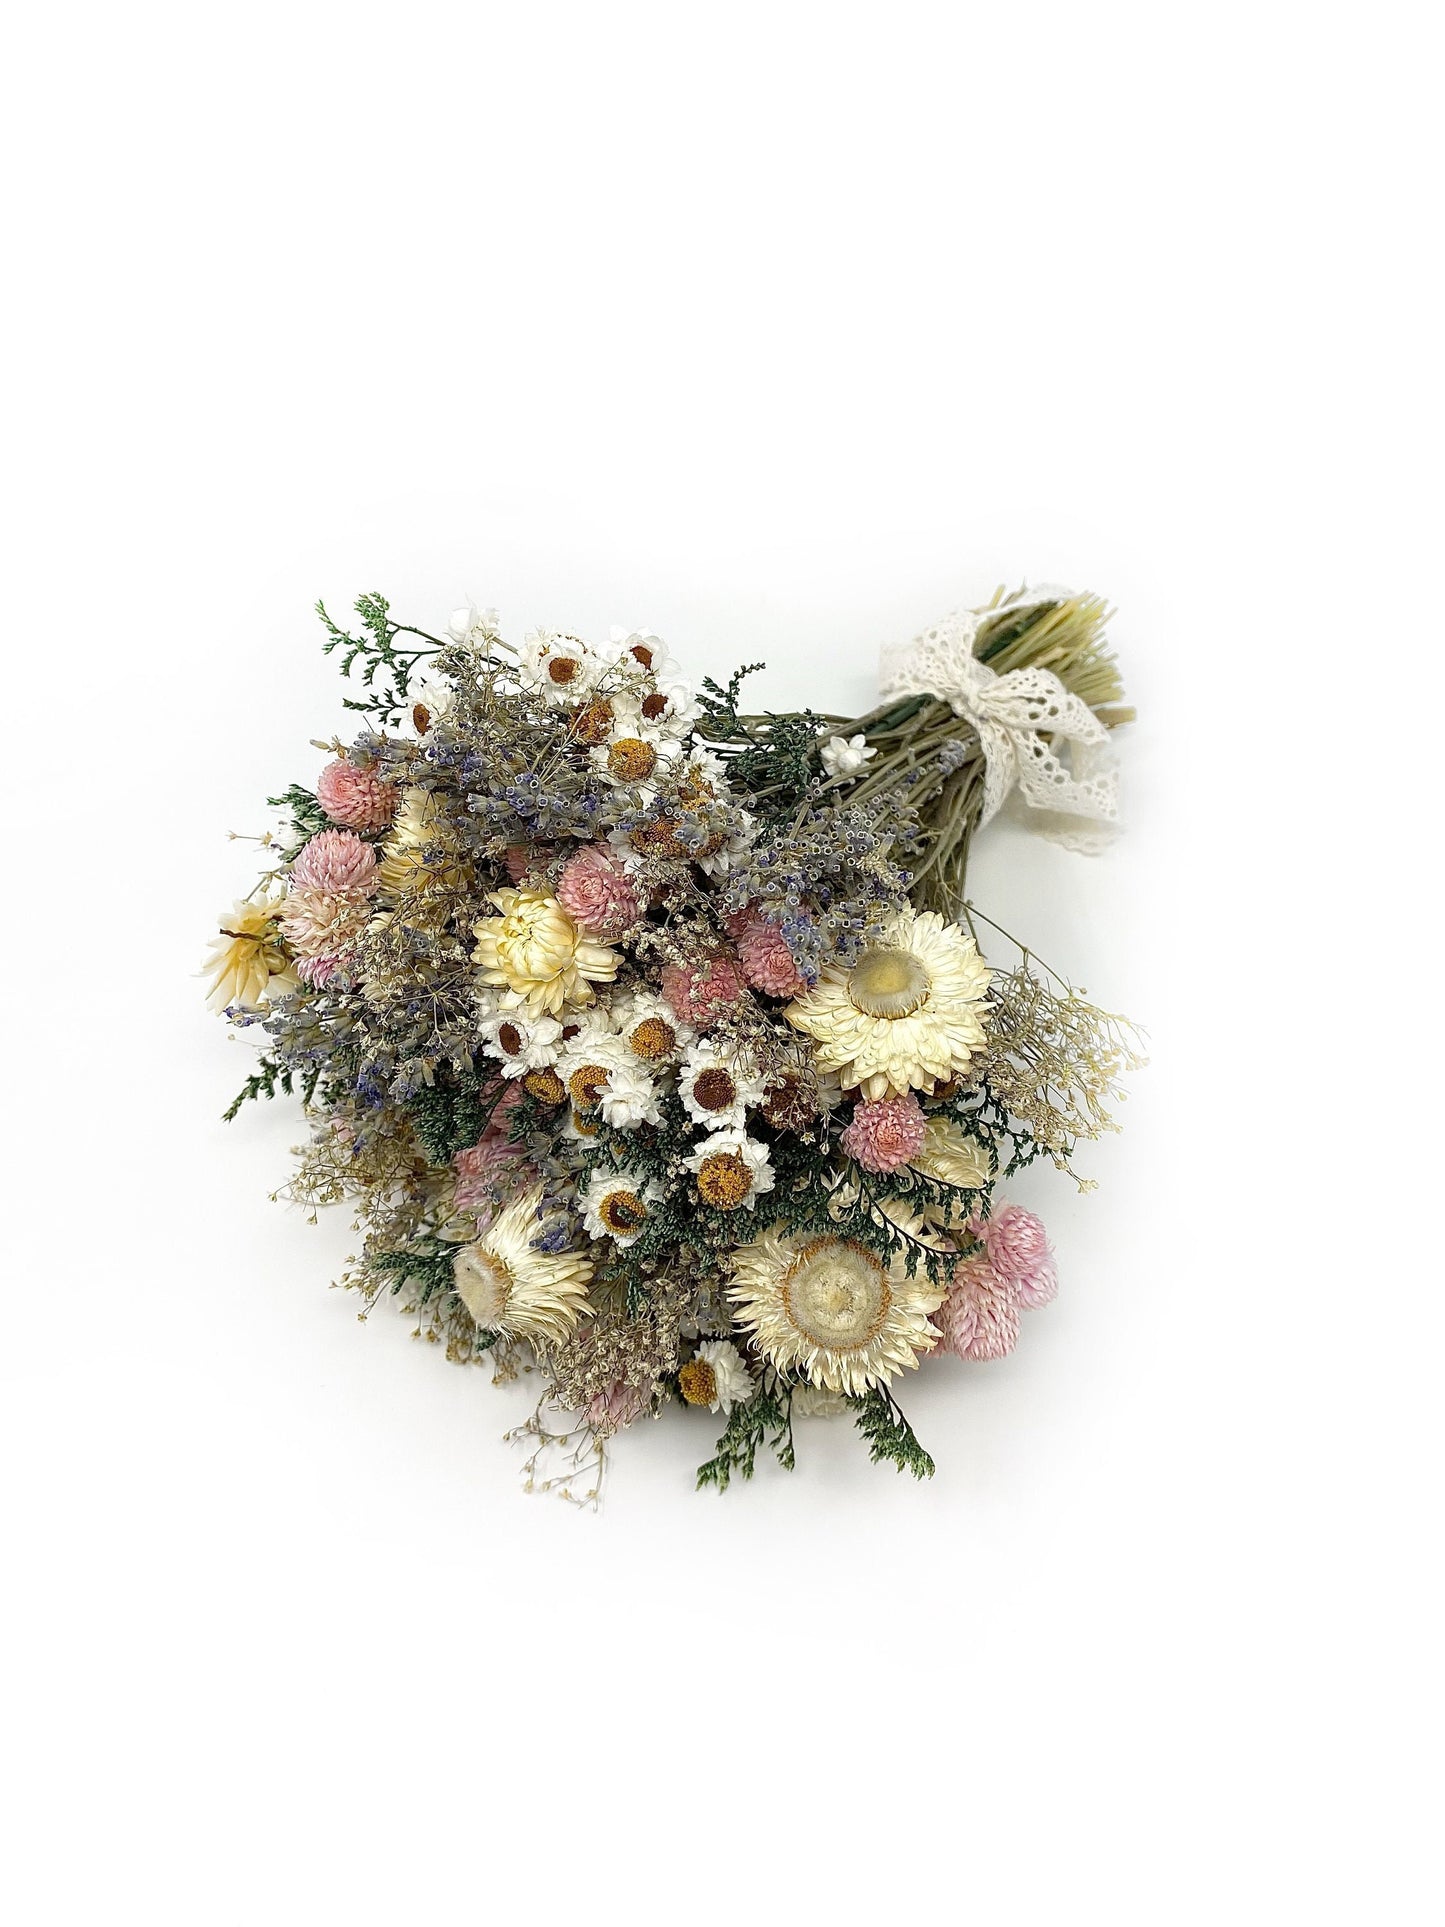 Wedding Bouquet, Dried Flowers, Preserved Floral, Rustic, Ammobium, Bridal, Winter, Throw Bouquet, Spring, Pink and White, Fairy, Lavender